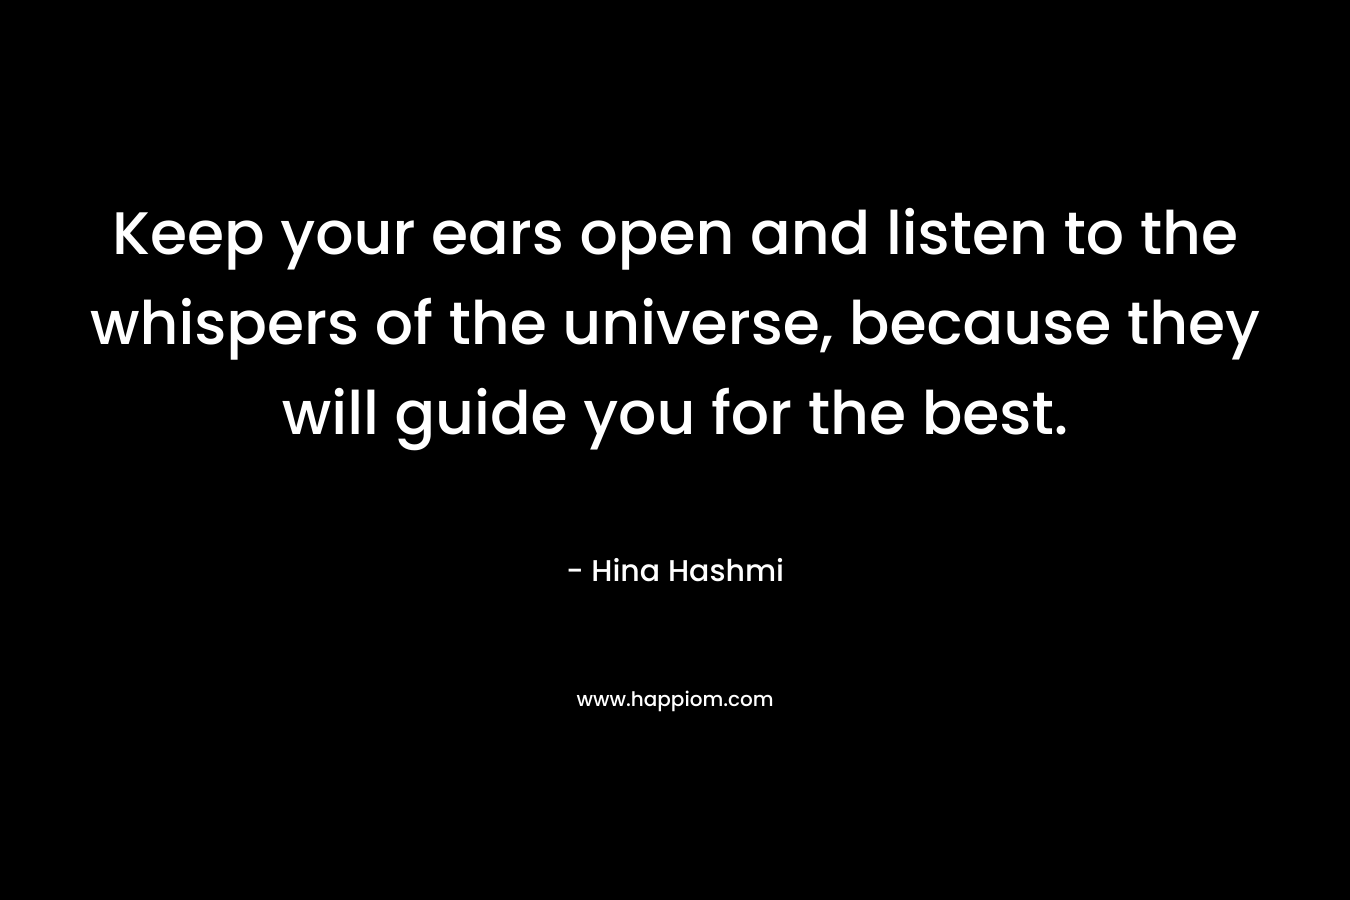 Keep your ears open and listen to the whispers of the universe, because they will guide you for the best.